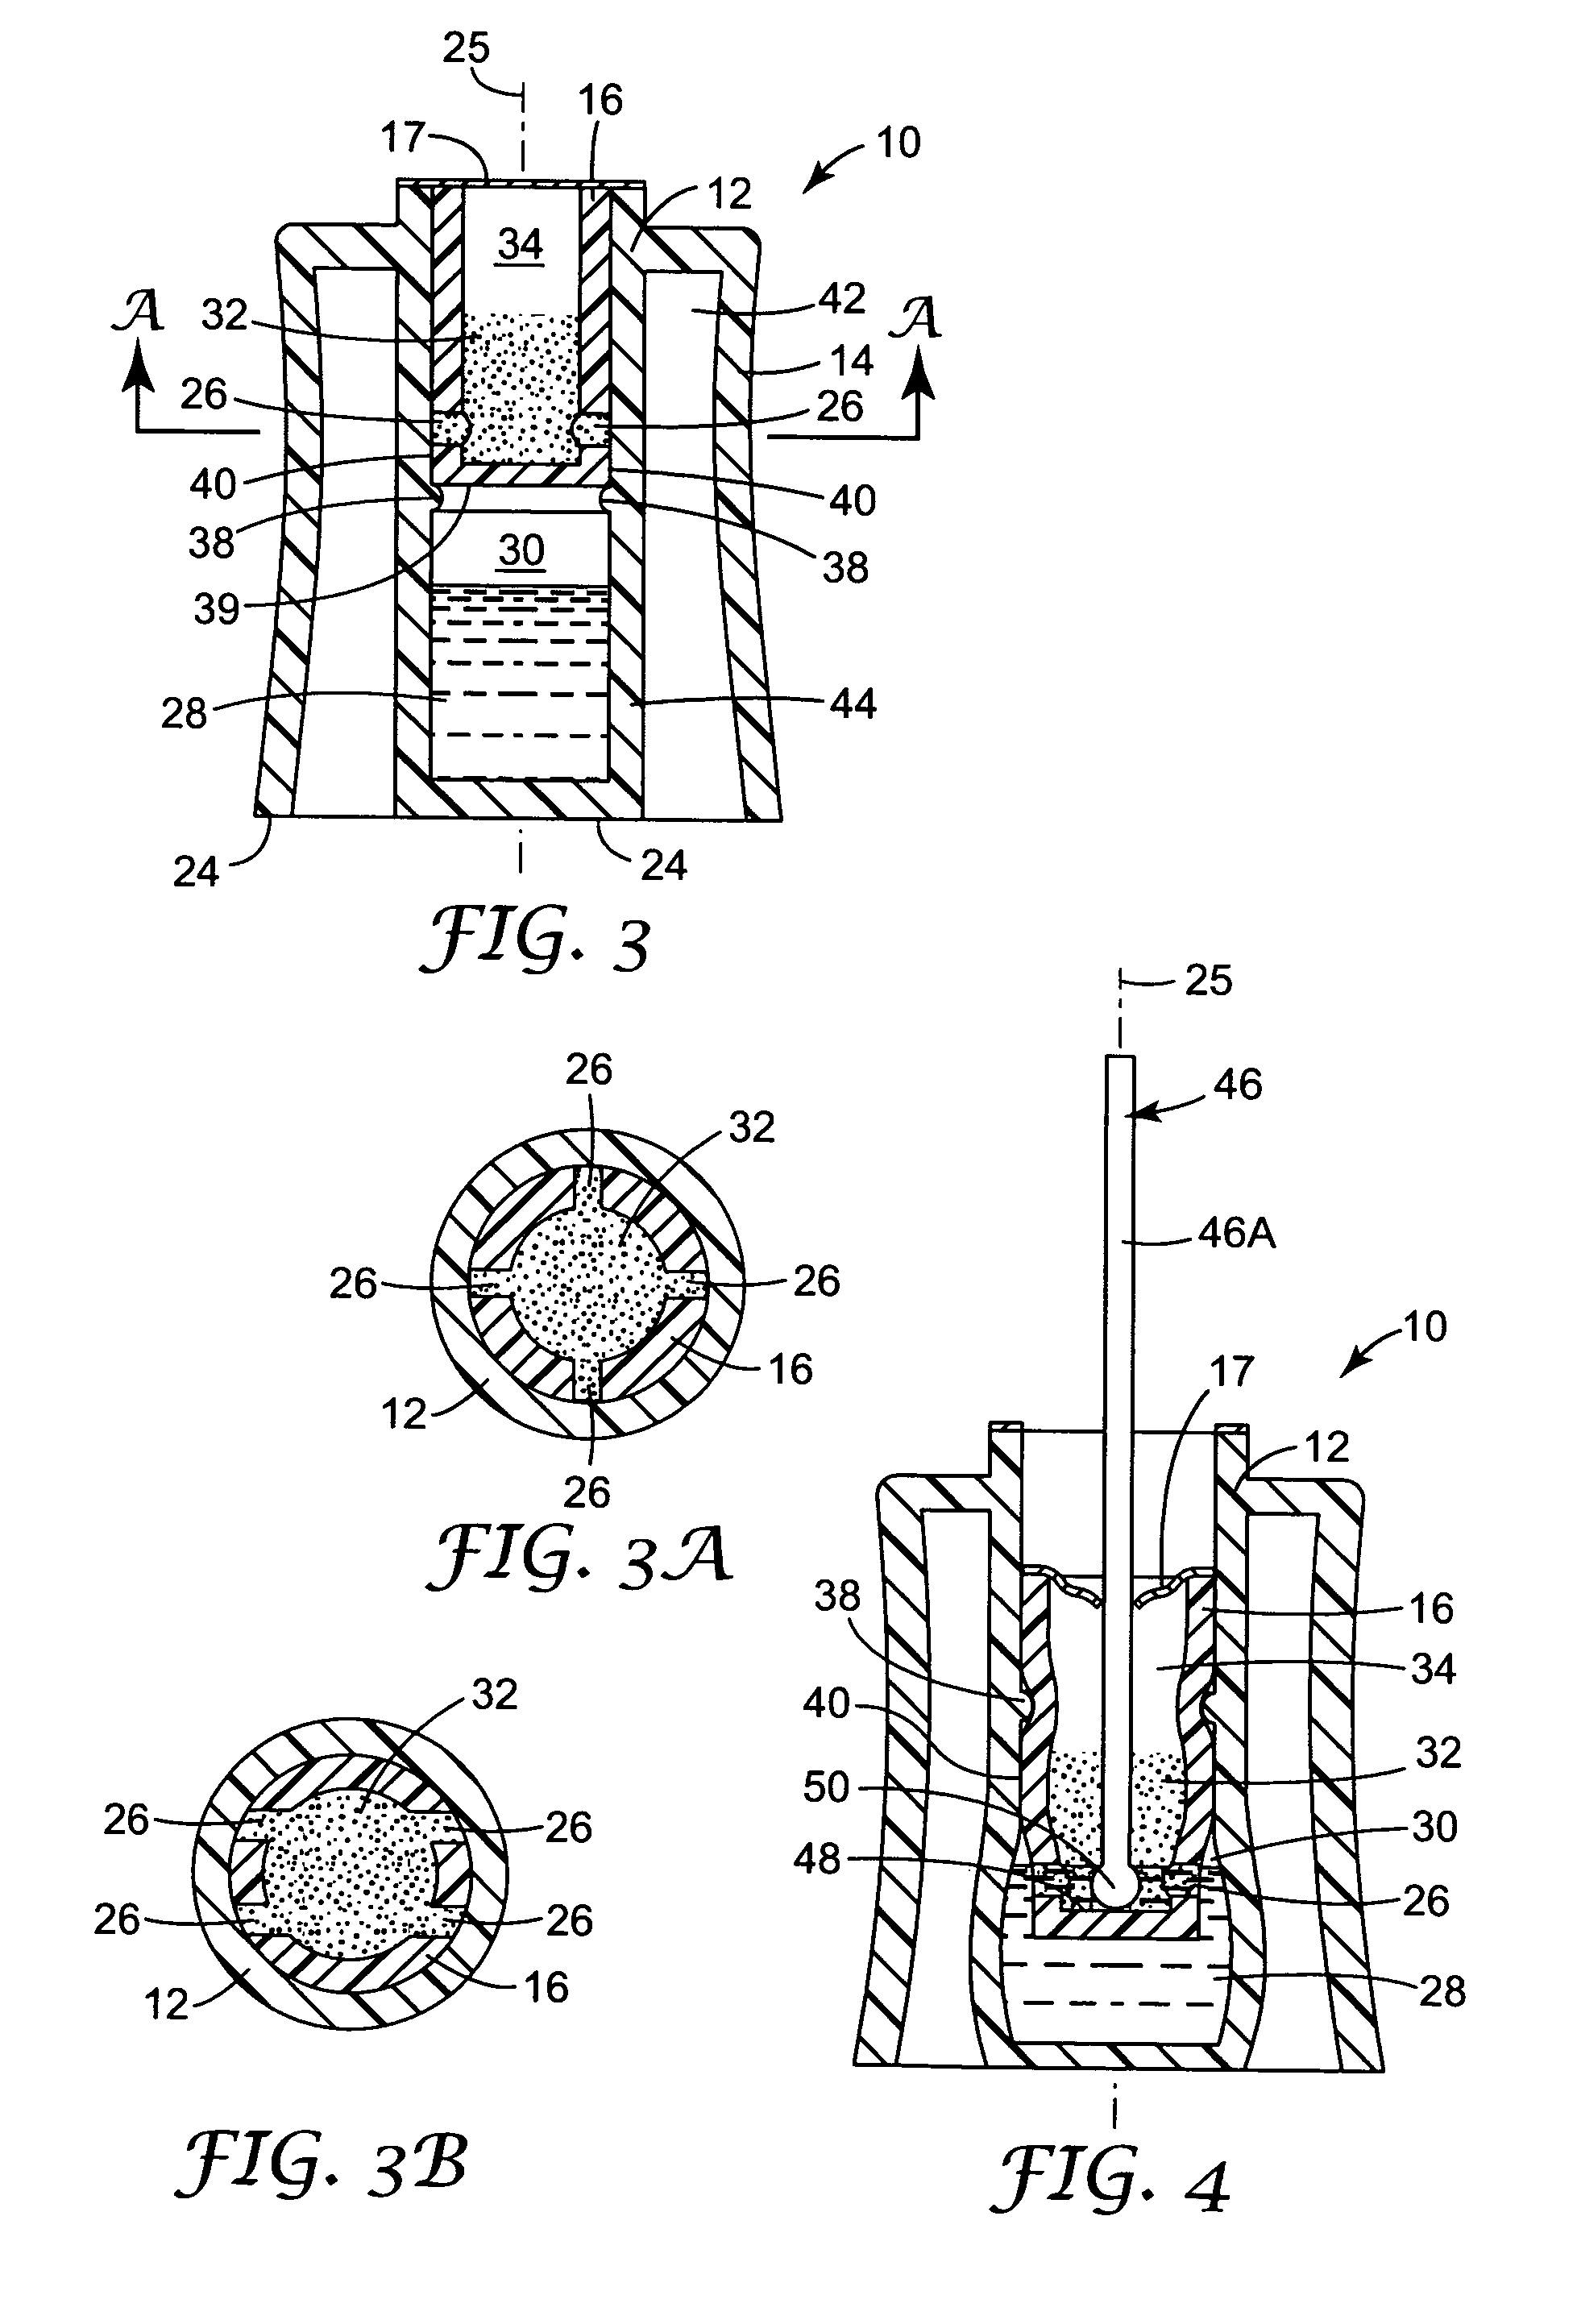 Unit dose delivery system